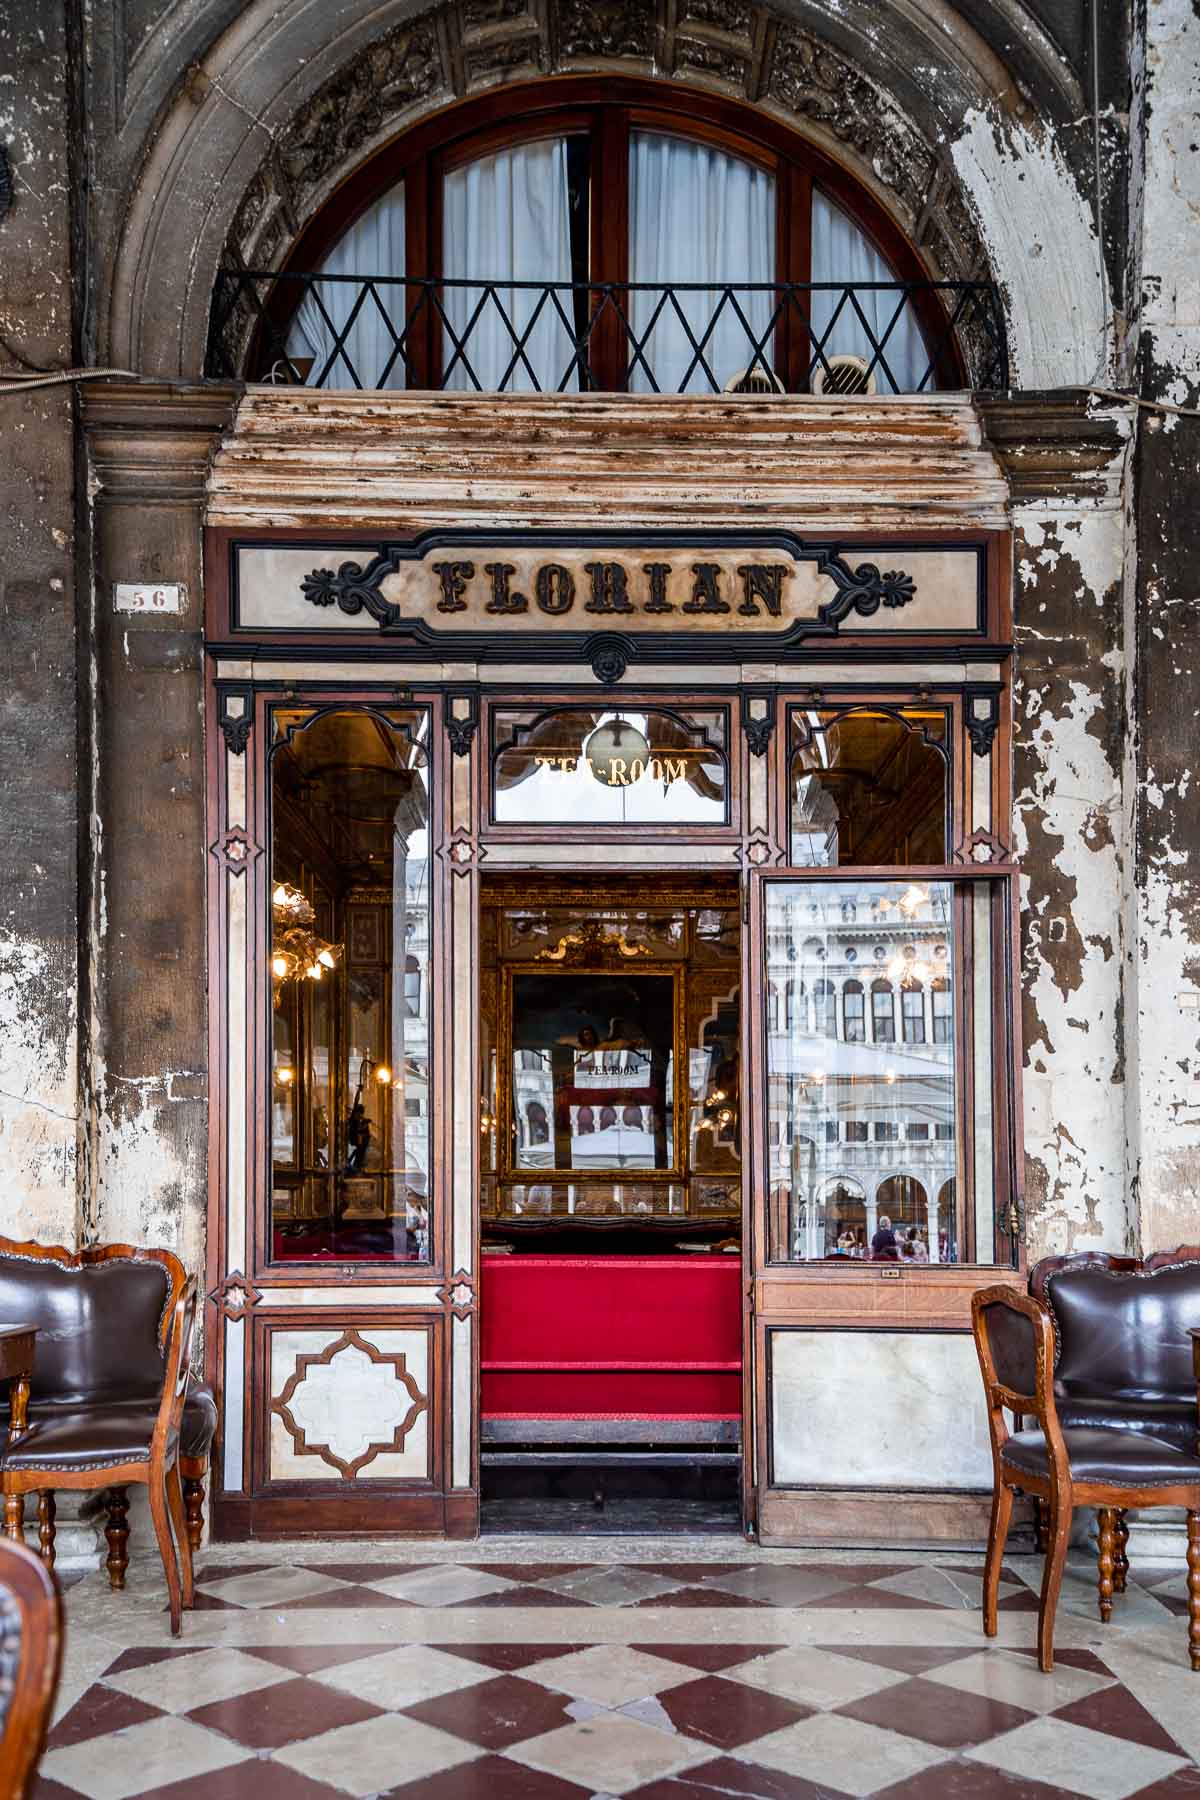 Florian Cafe in Venice, Italy